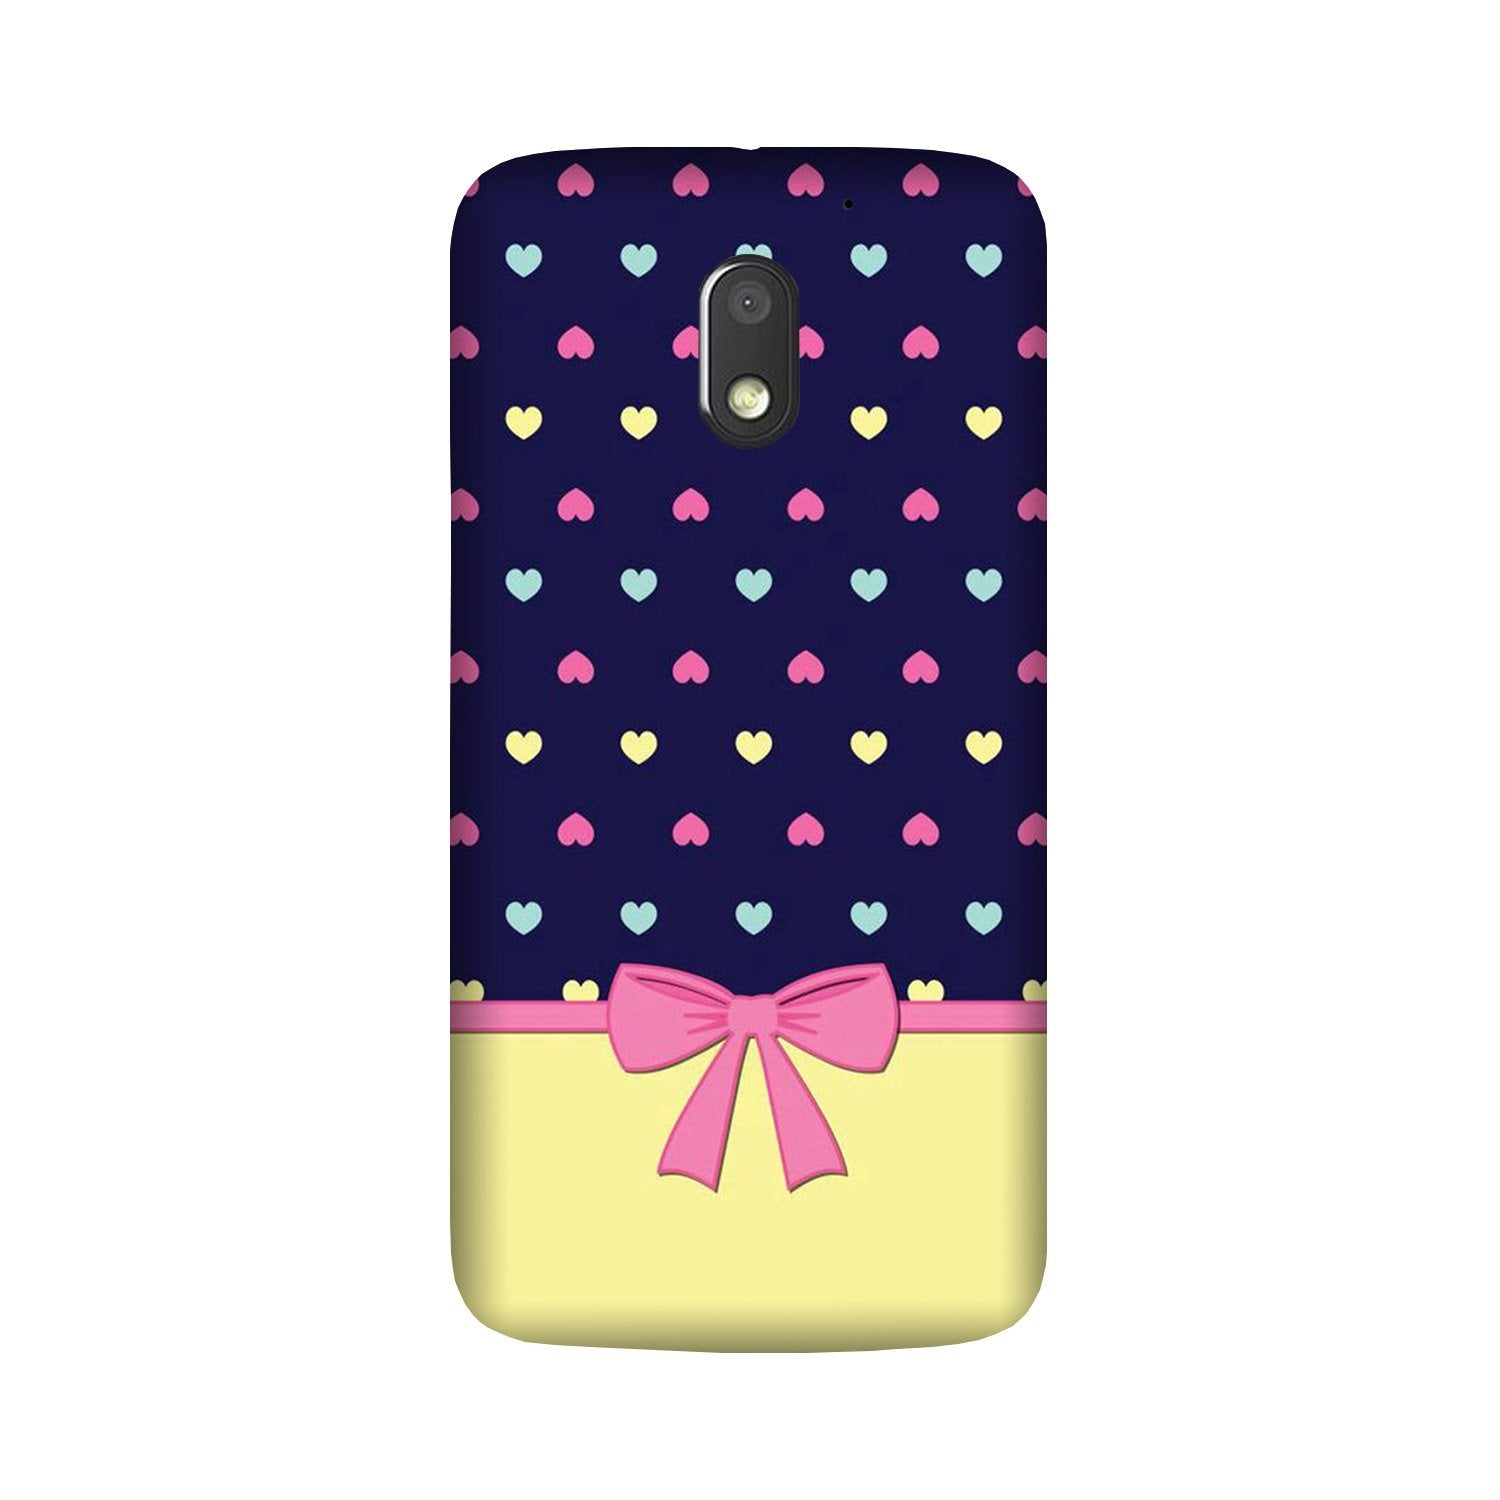 Gift Wrap5 Case for Moto G4 Play